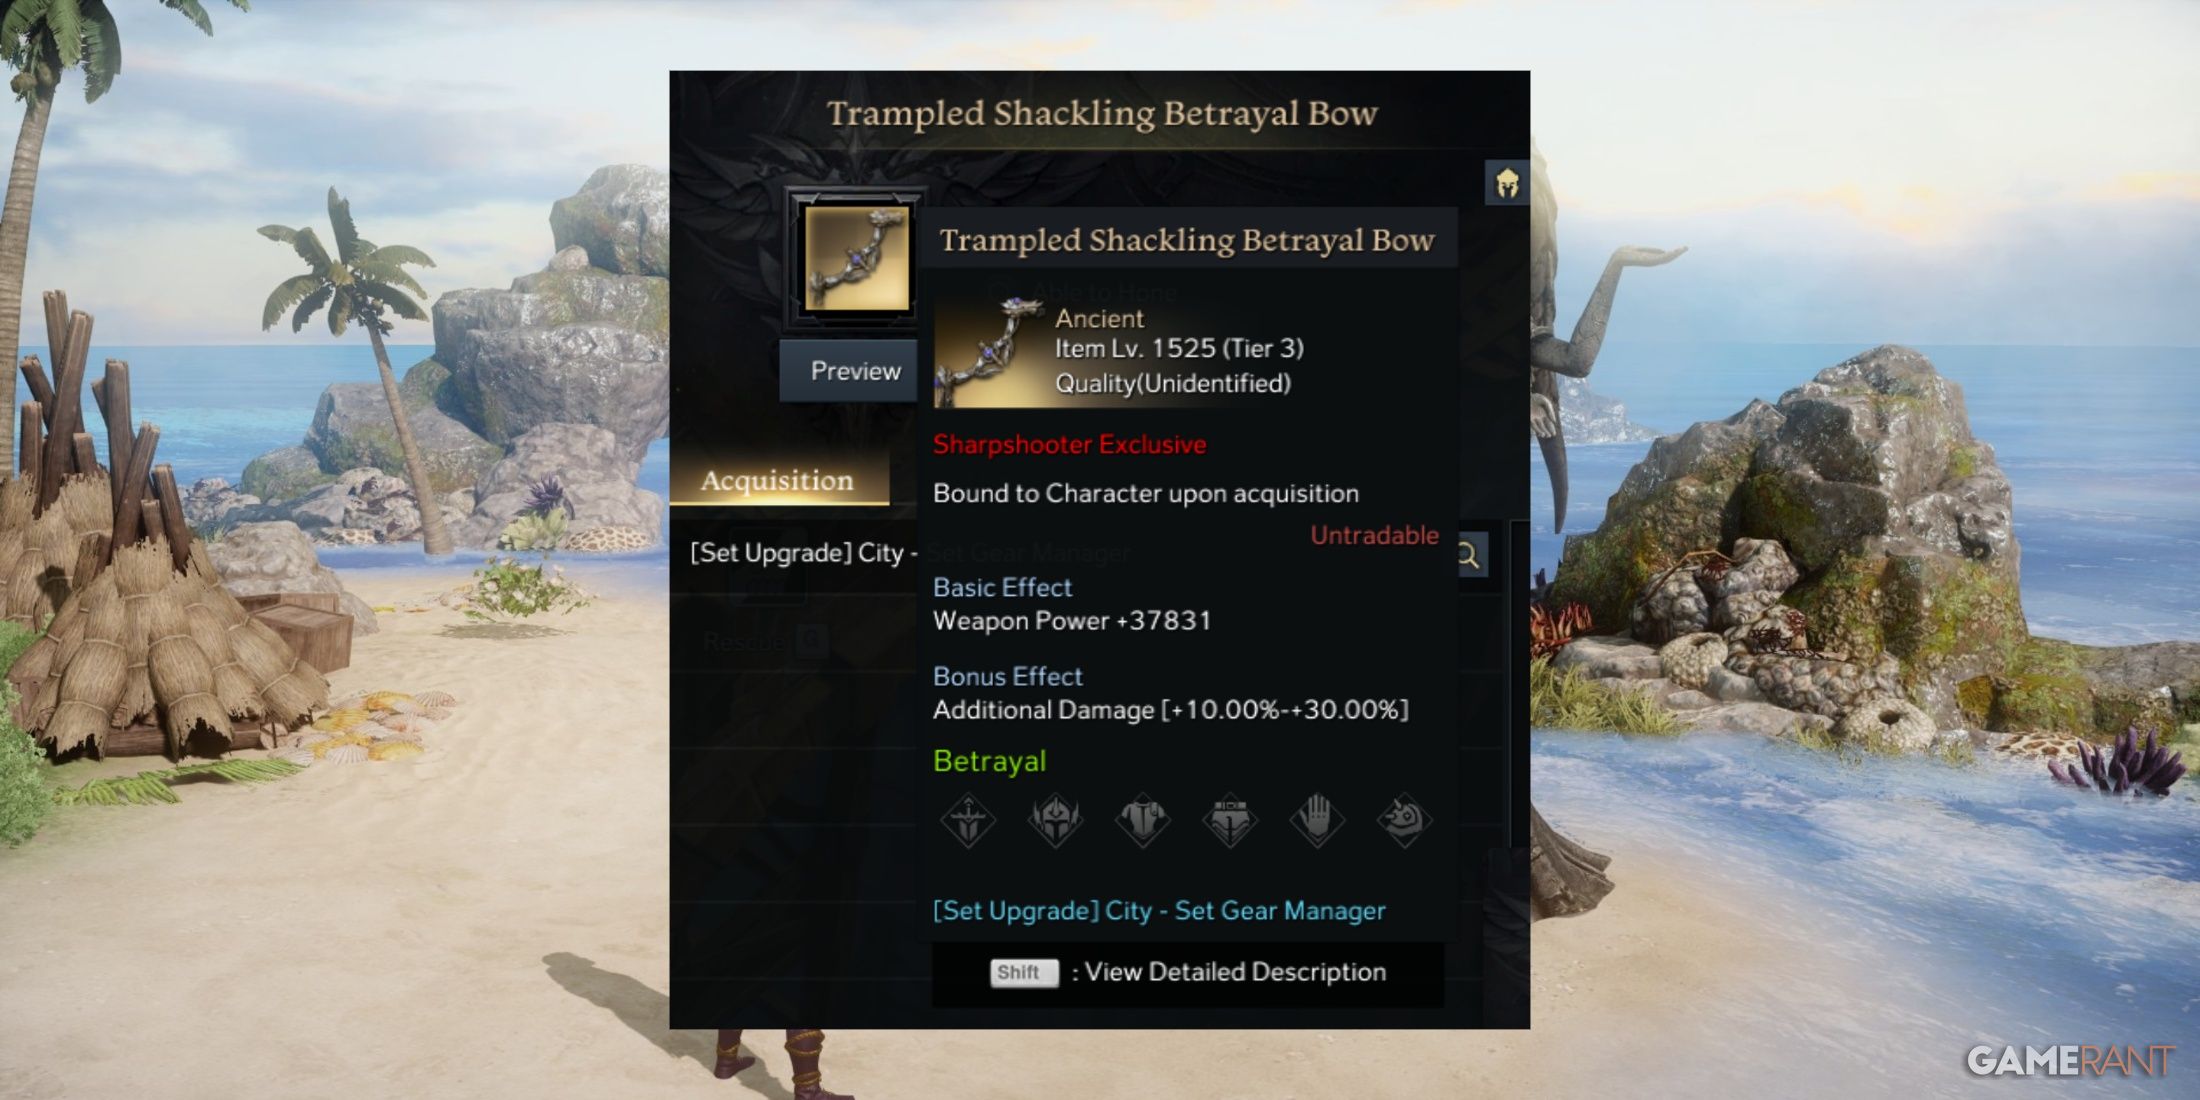 Trampled Shackling Betrayal Bow In Lost Ark